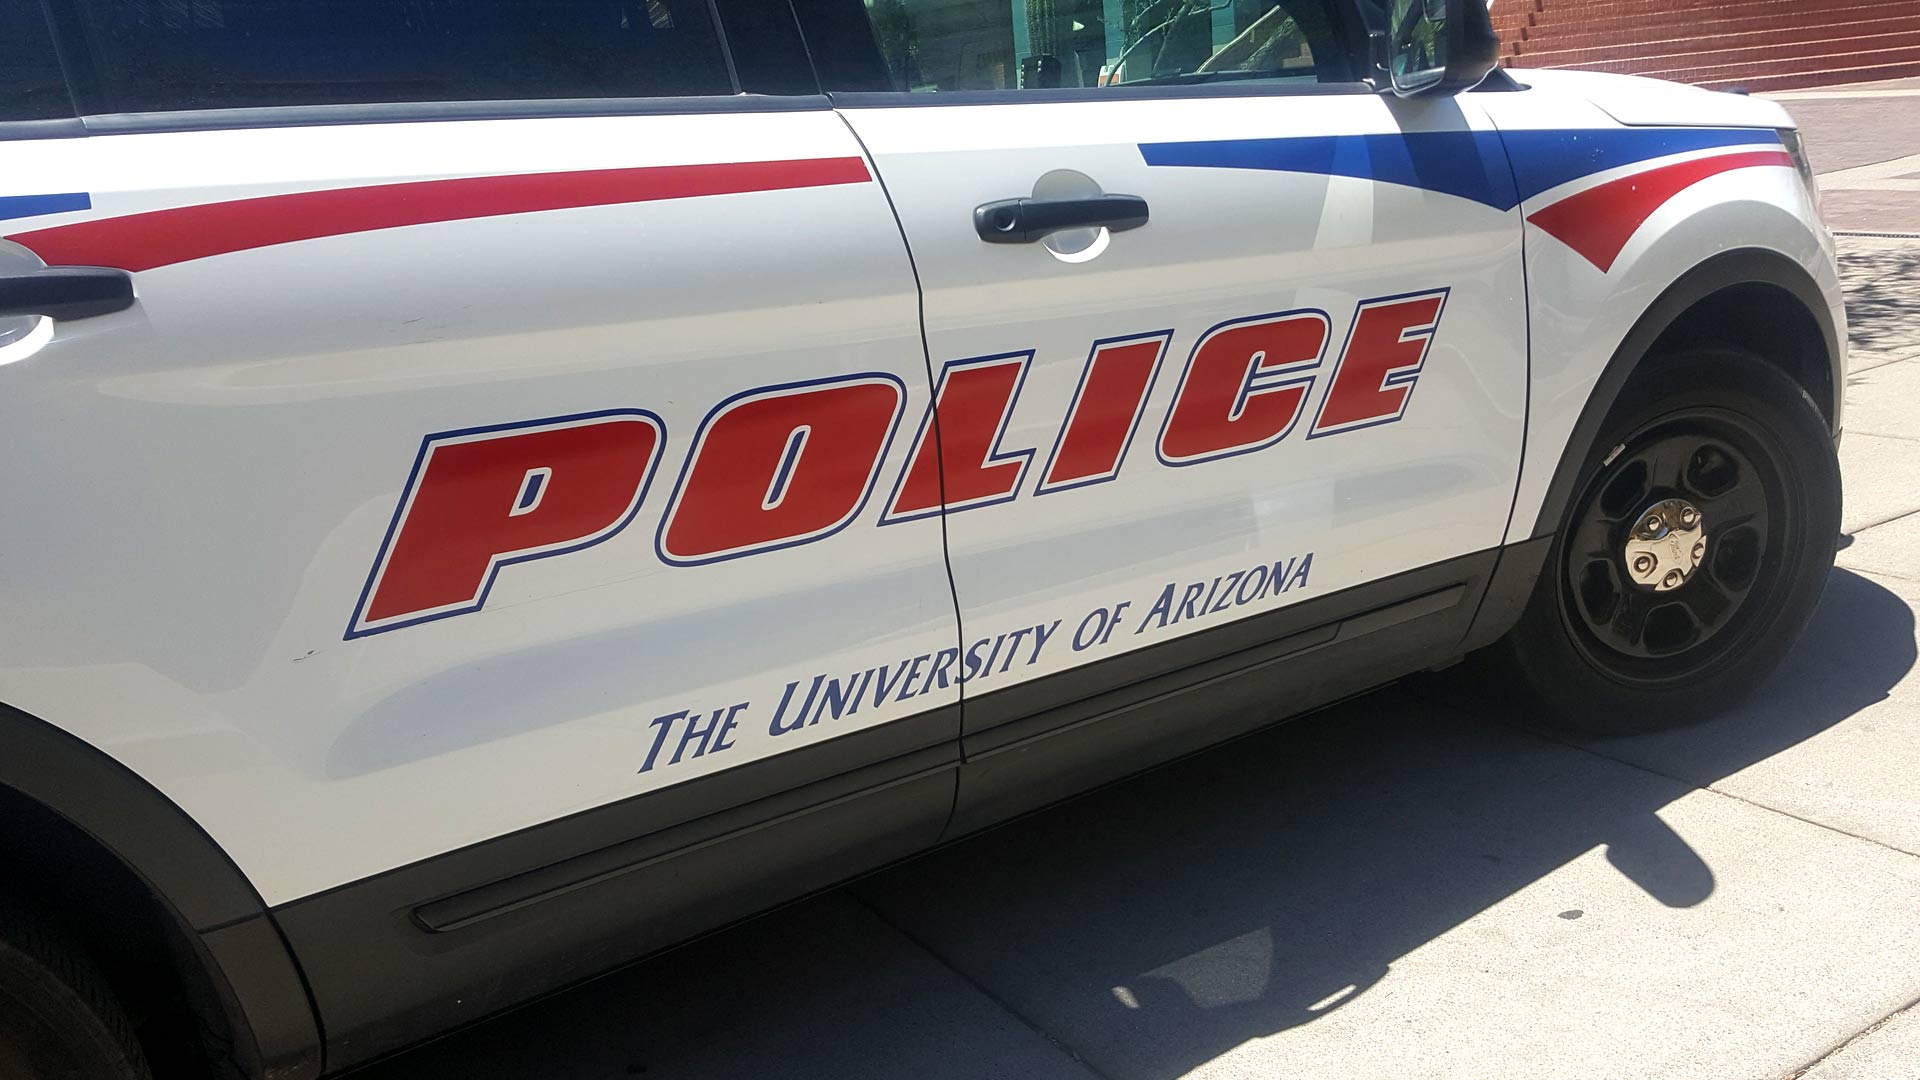 A UAPD vehicle parked on campus, outside of the Second Street Garage.